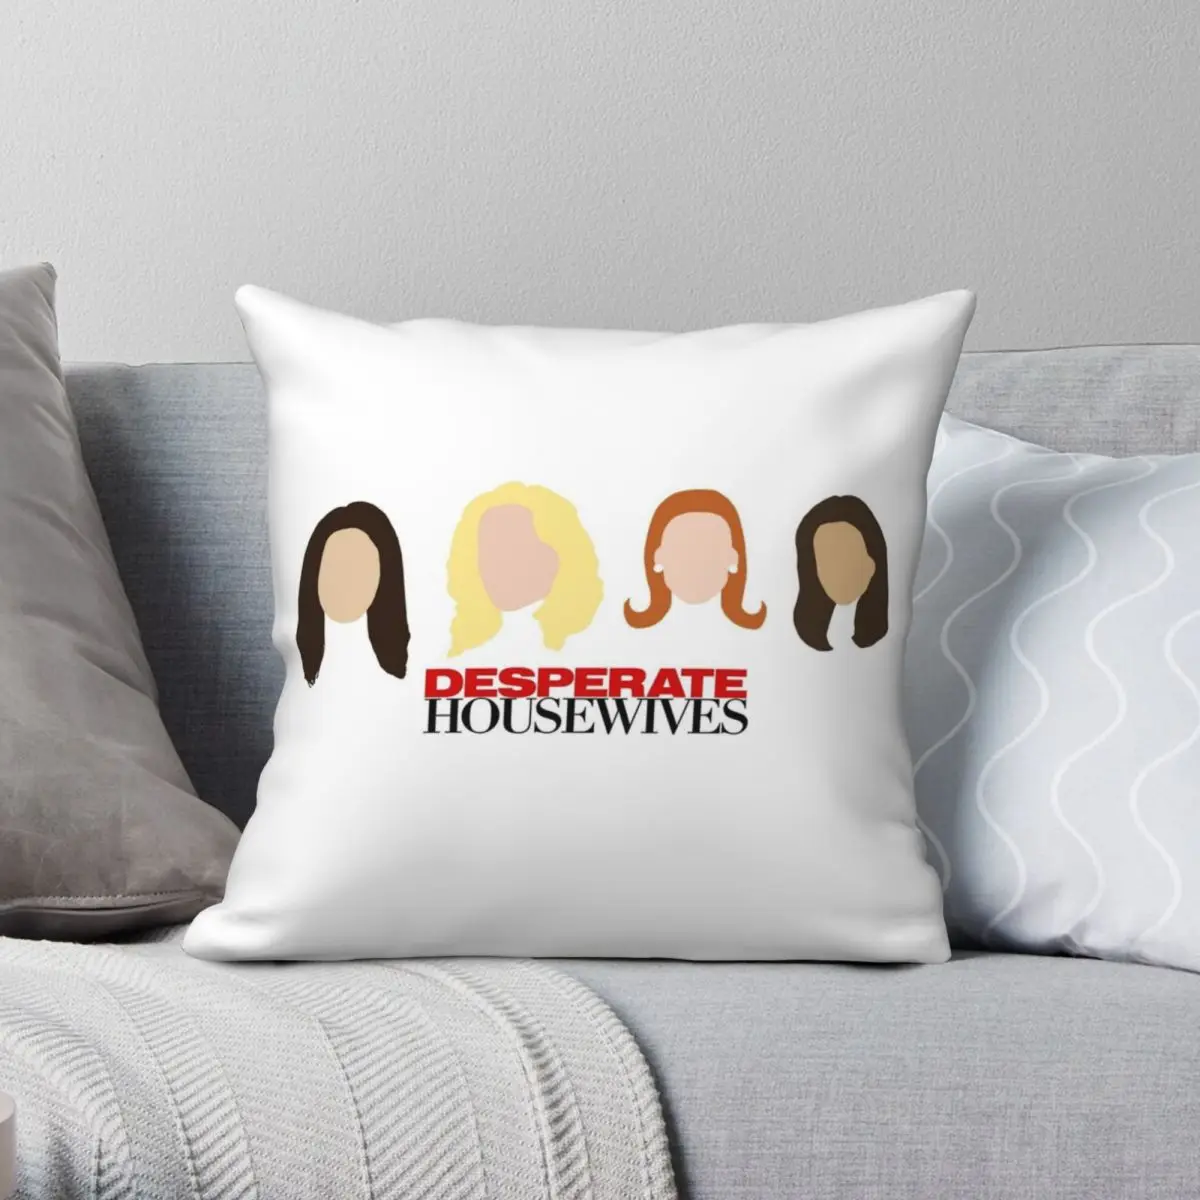 

Desperate Housewives Square Pillowcase Polyester Linen Velvet Pattern Zip Decorative Pillow Case Sofa Seater Cushion Cover 45x45